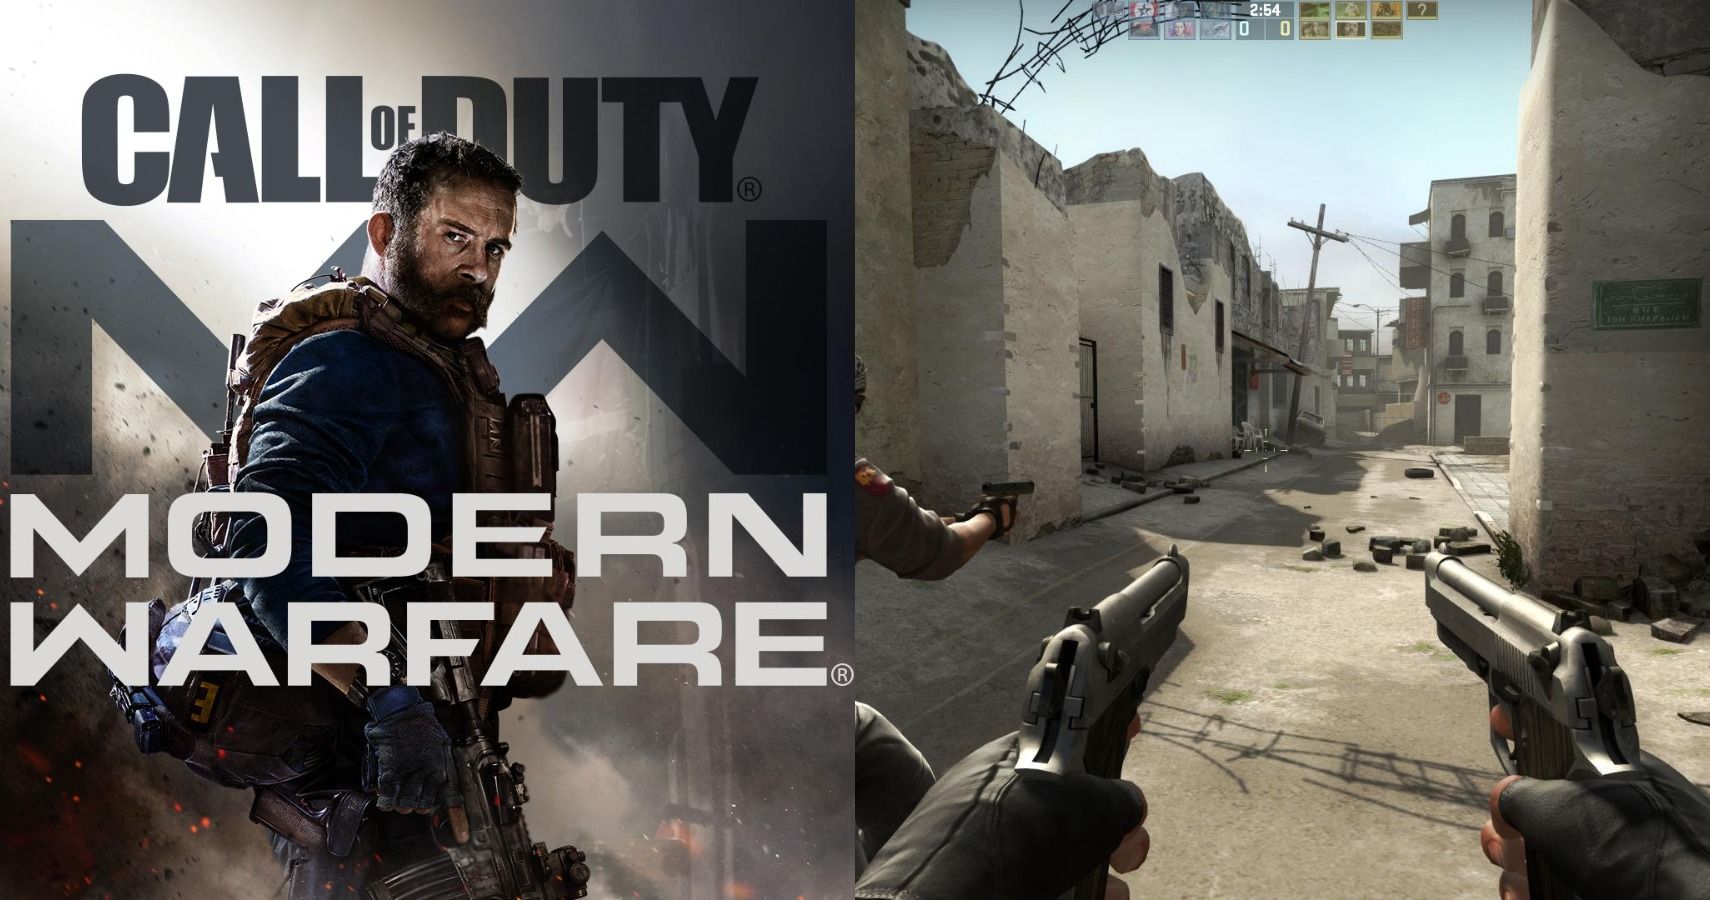 aankomen Robijn dikte 15 First-Person Shooters To Play If You Like Call Of Duty: Modern Warfare